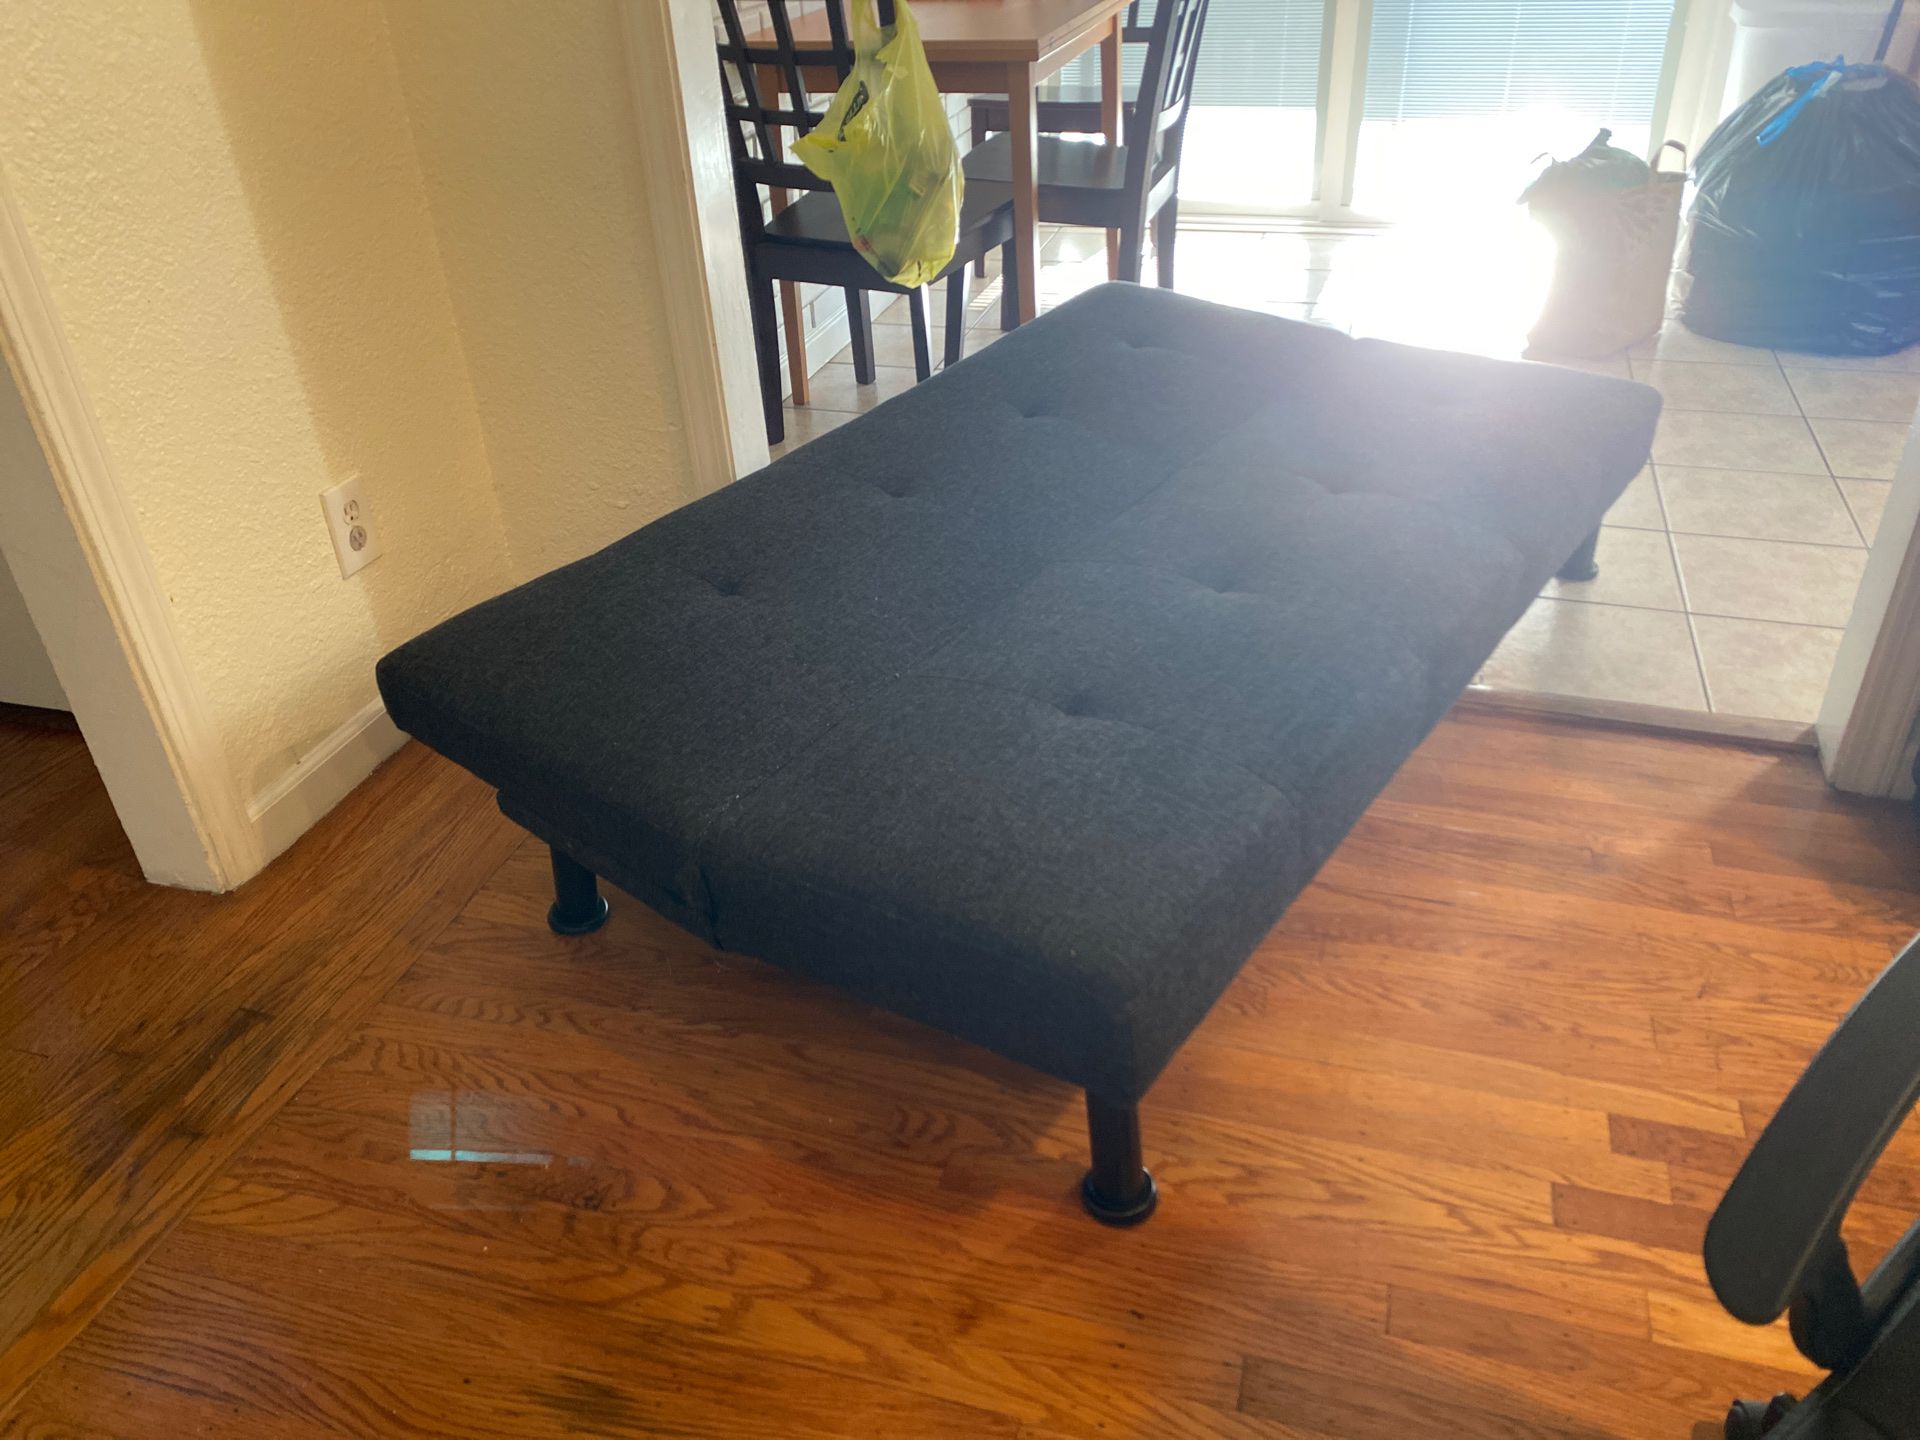 FUTON MUST GO FOR FREE PICK UP TODAY